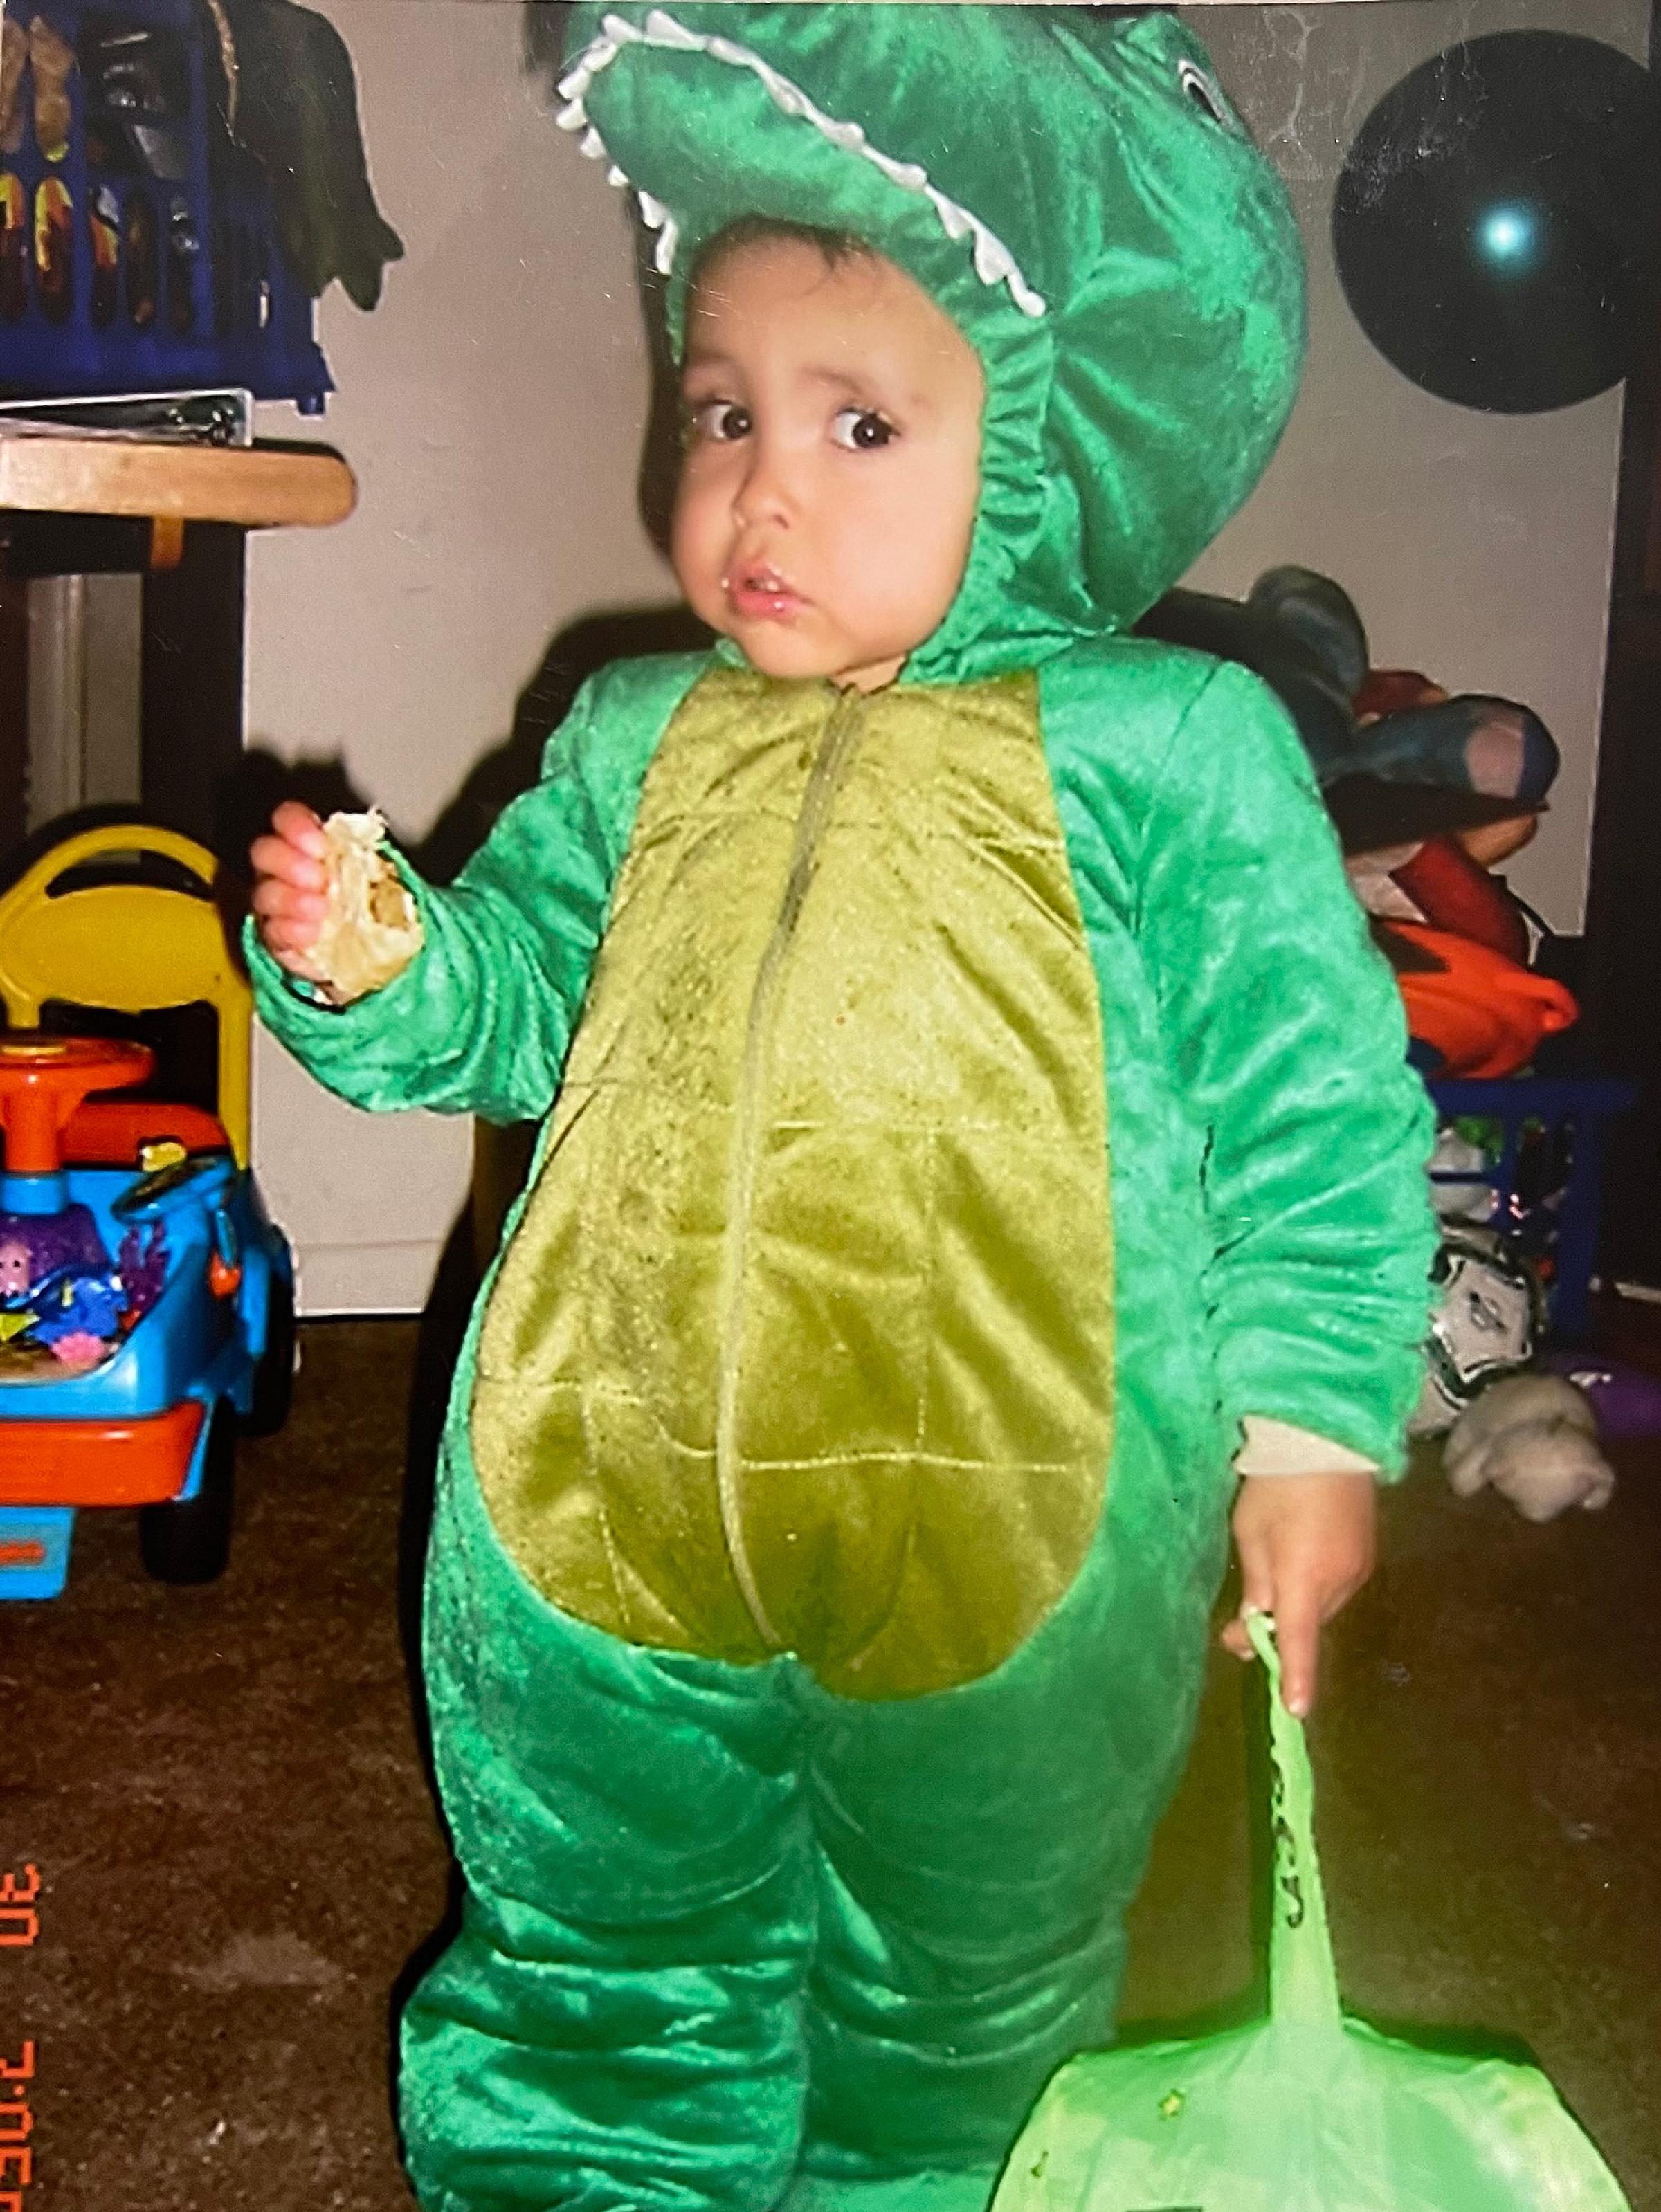 Jose Hernandez dressed as a dinosaur when he was a child